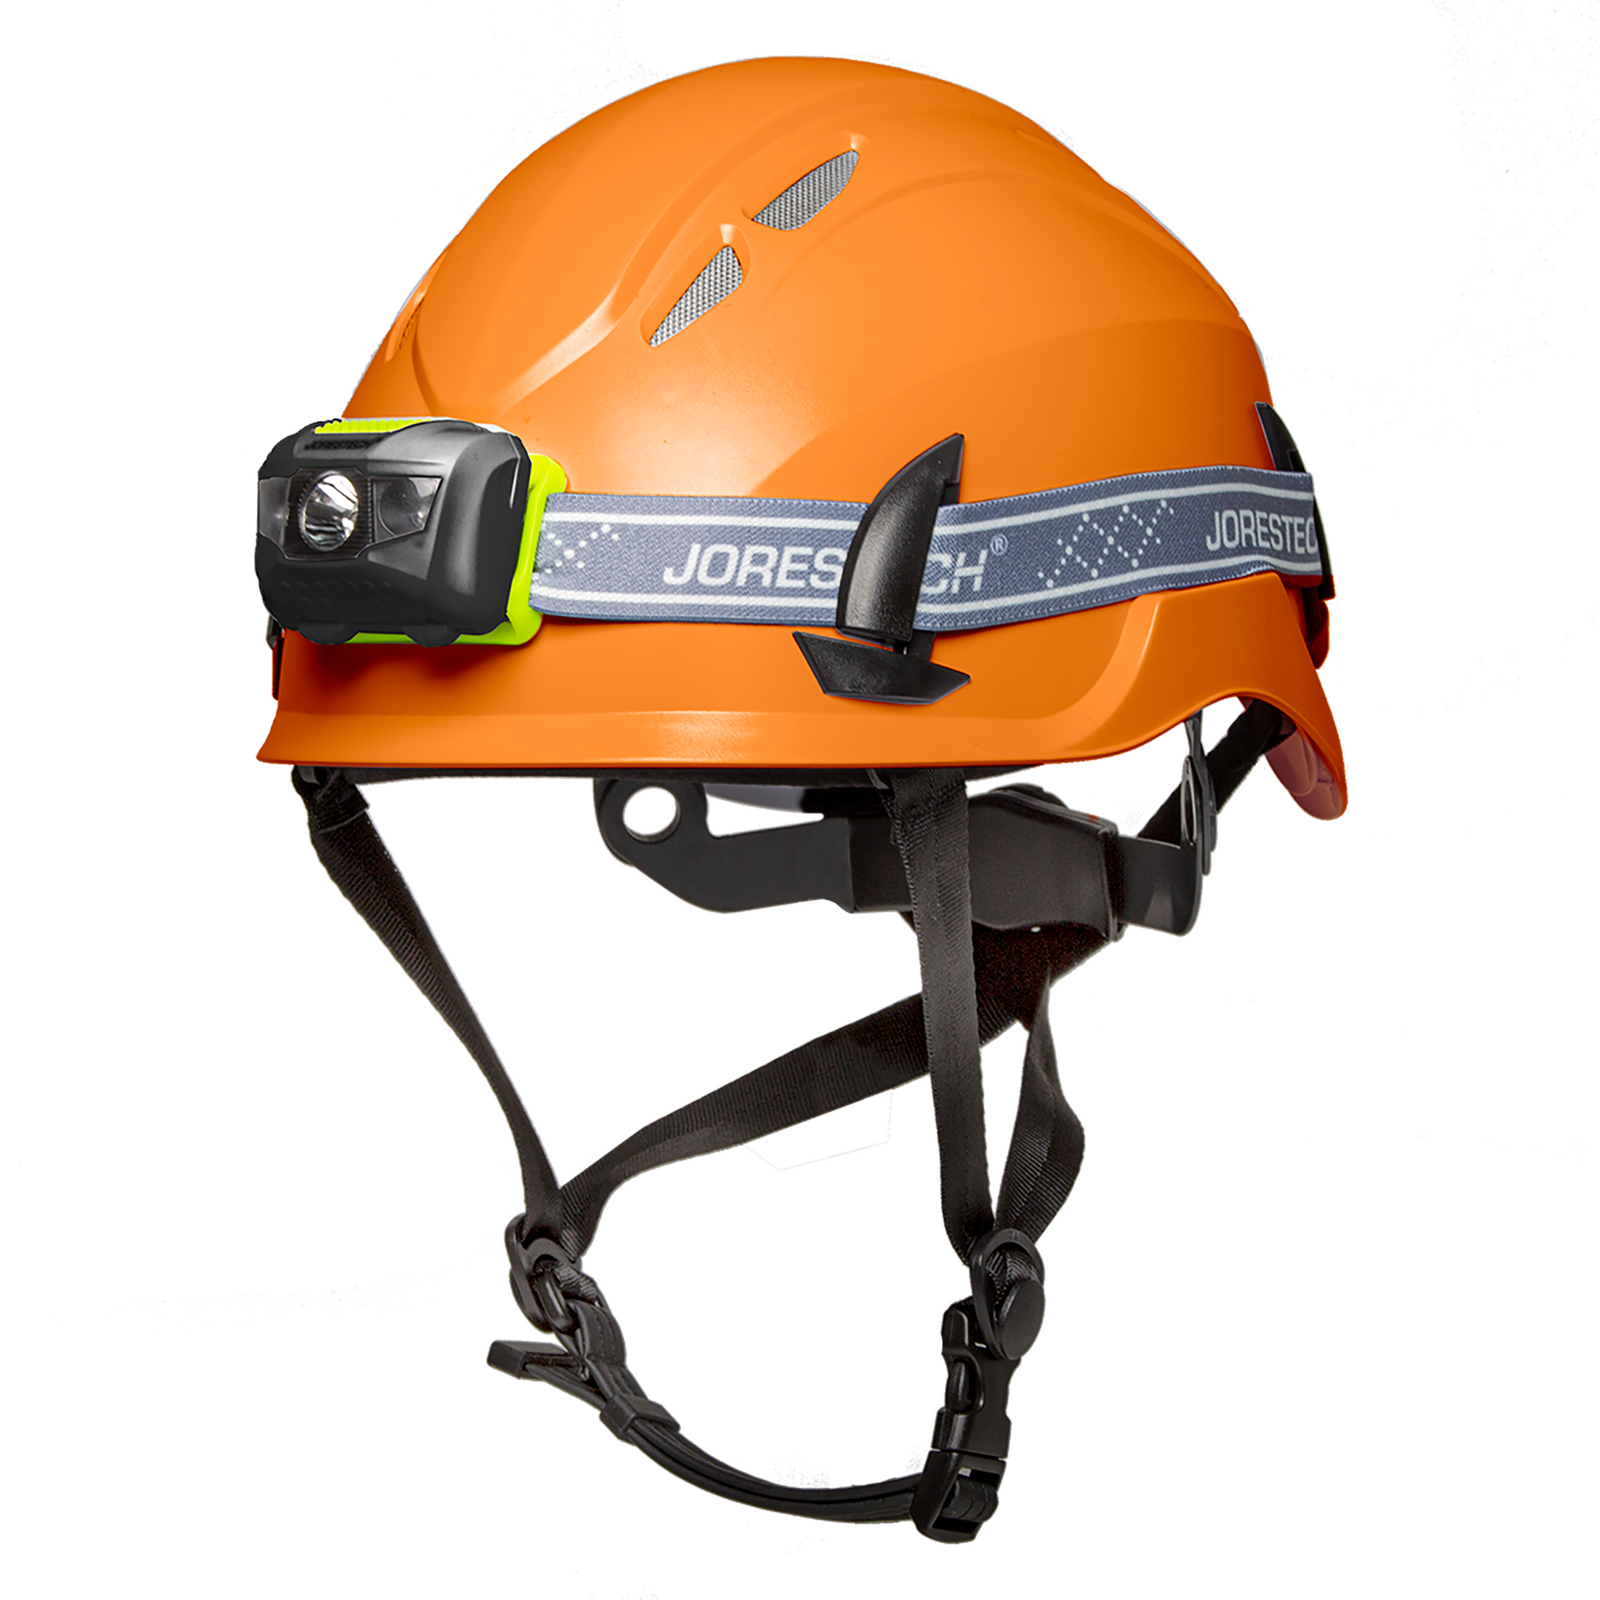 Diagonal view of an orange ventilated JORESTECH hard hat with chin strap and a the JORESTECH black water resistant headlamp bundle